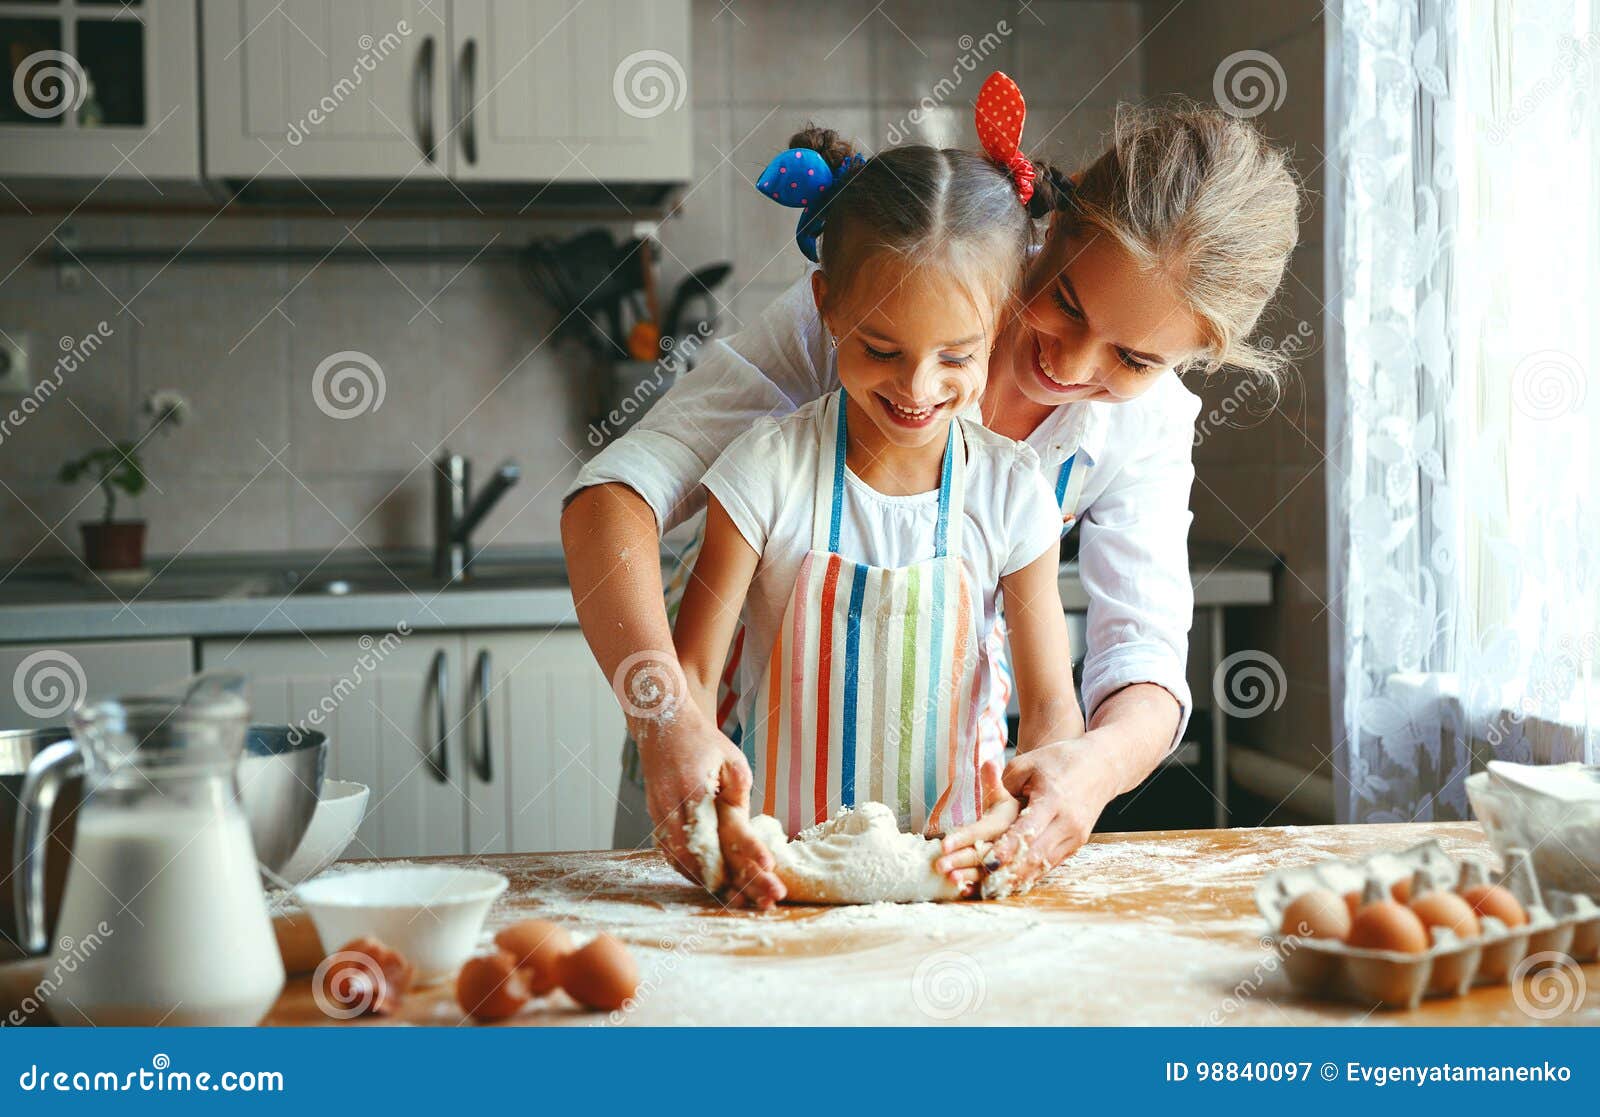 happy family mother and daughter bake kneading dough in kitchen